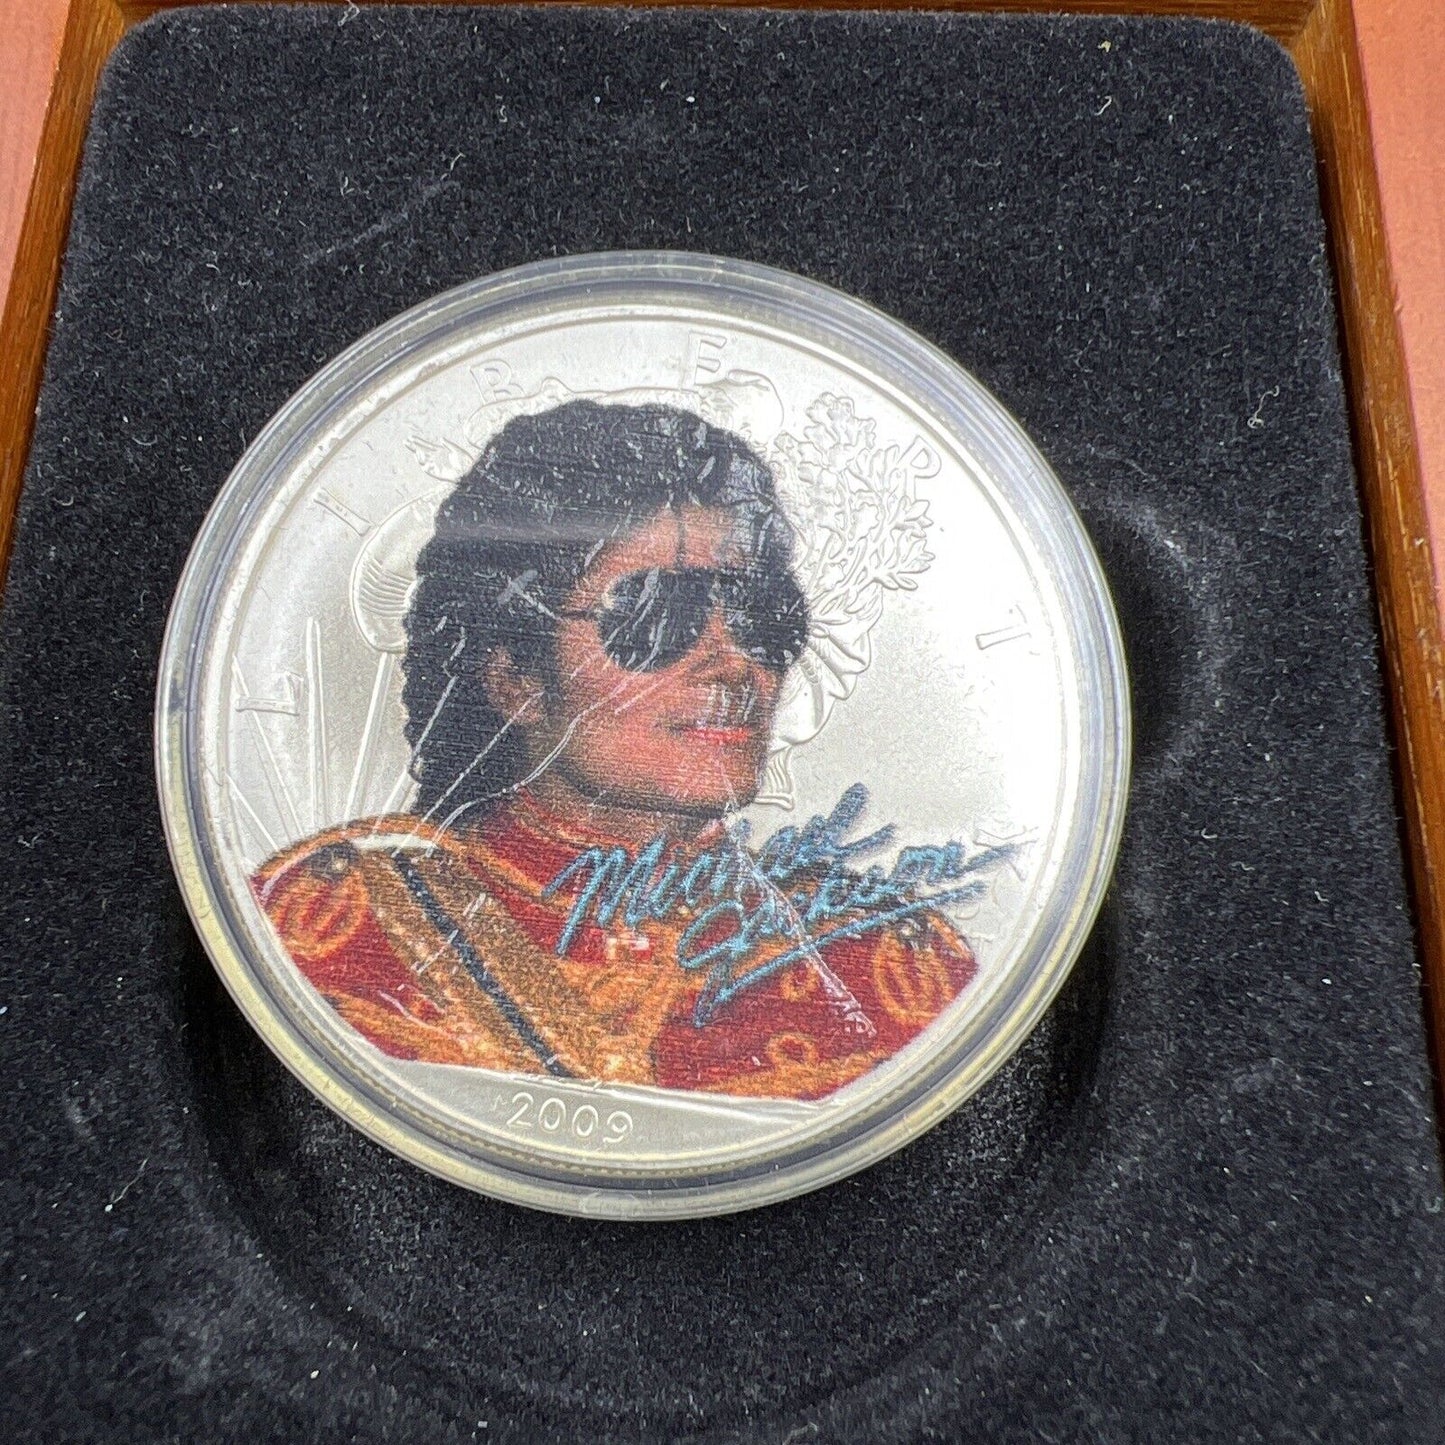 Officially Licensed Michael Jackson Signature 1 OZ 2009 American Silver Eagle